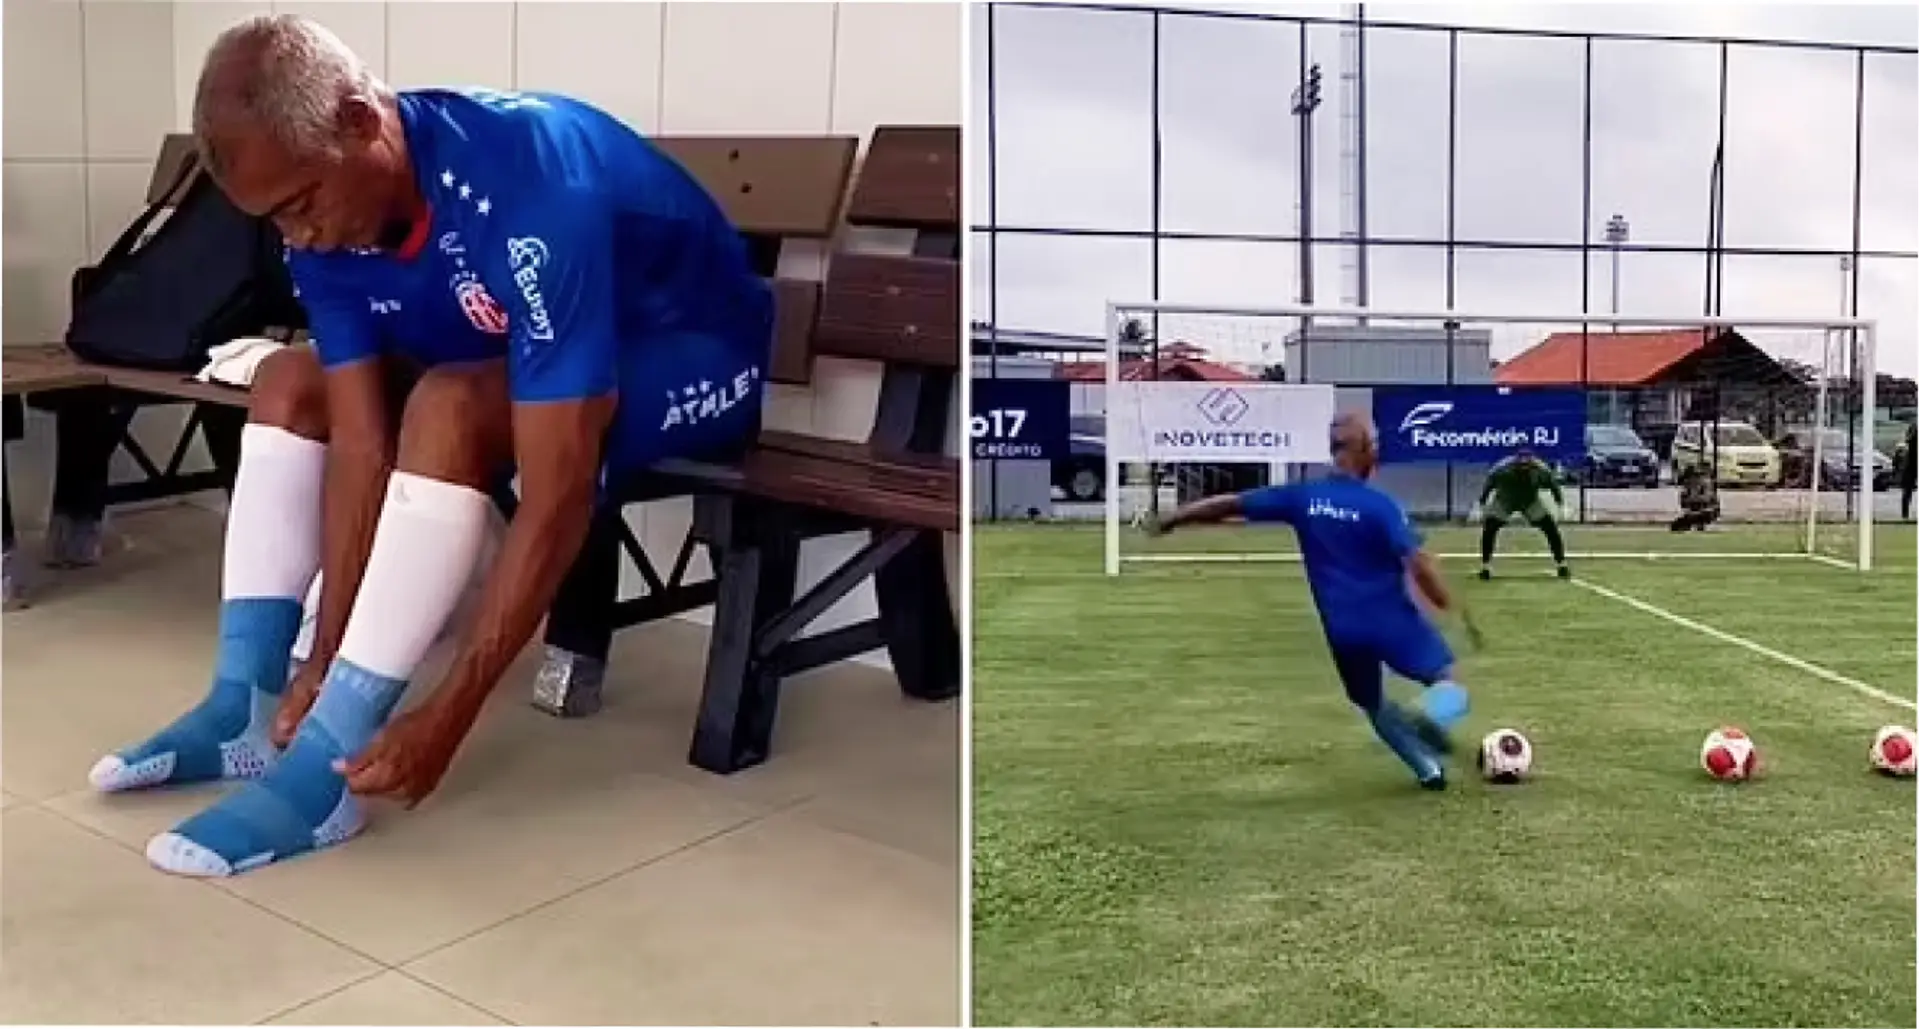 "I'm f**king tired": Romario hilariously comments on his first training session in 15 years